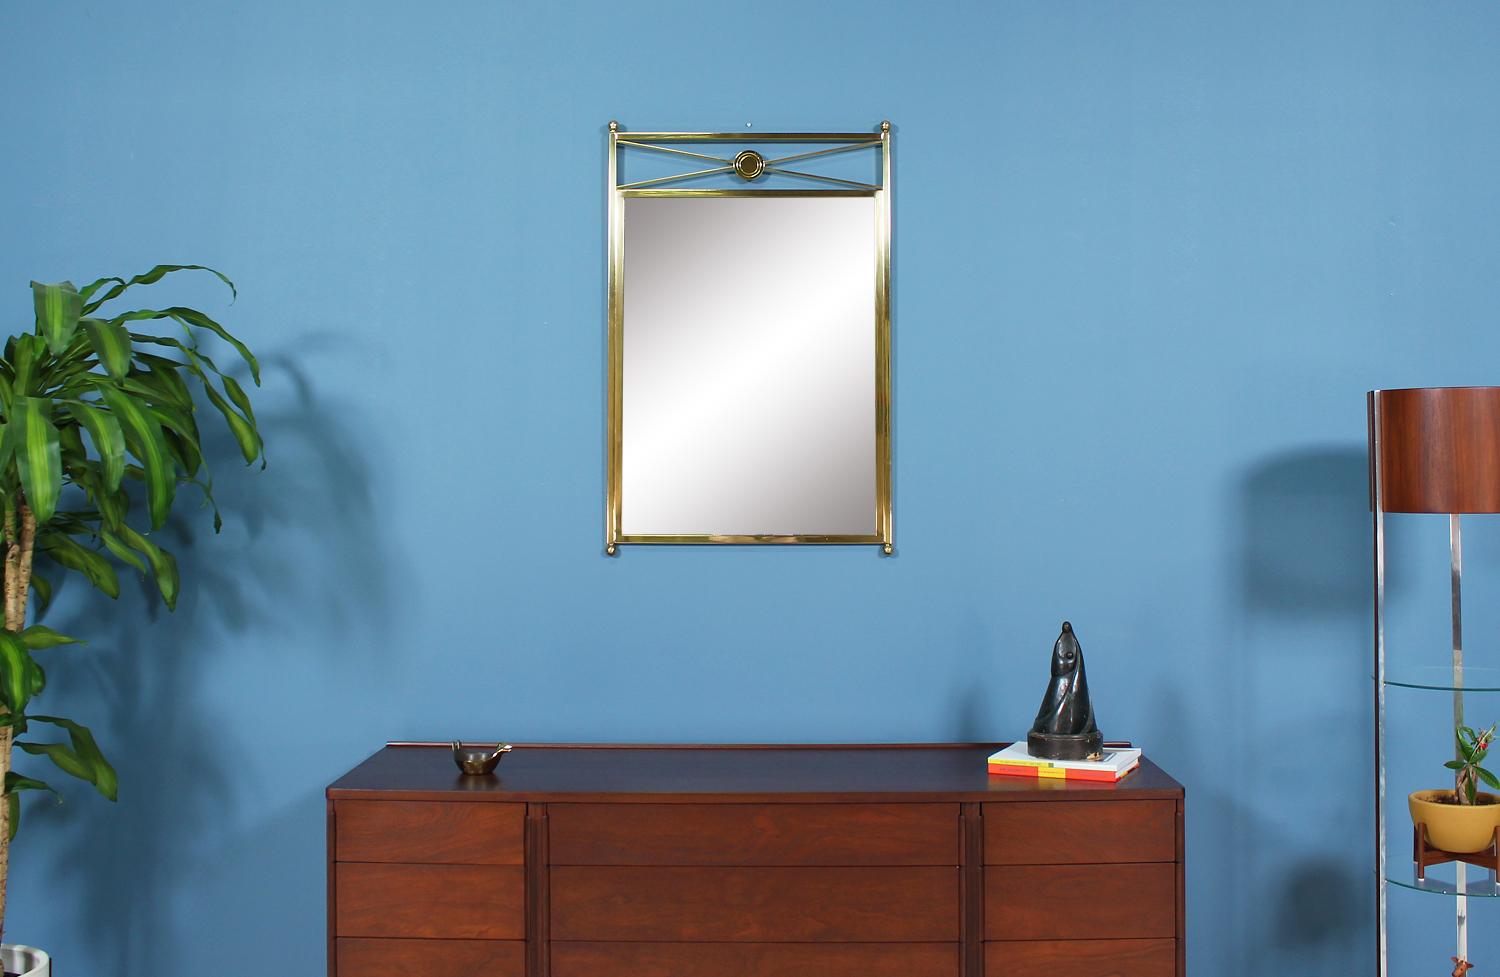 Dazzling mirror designed and manufactured by Baker Furniture Co. in the United States circa 1950’s. This beautiful Neoclassical style mirror features a sturdy lightly patinated brass-plated frame and maintains its original mirror creating a look of